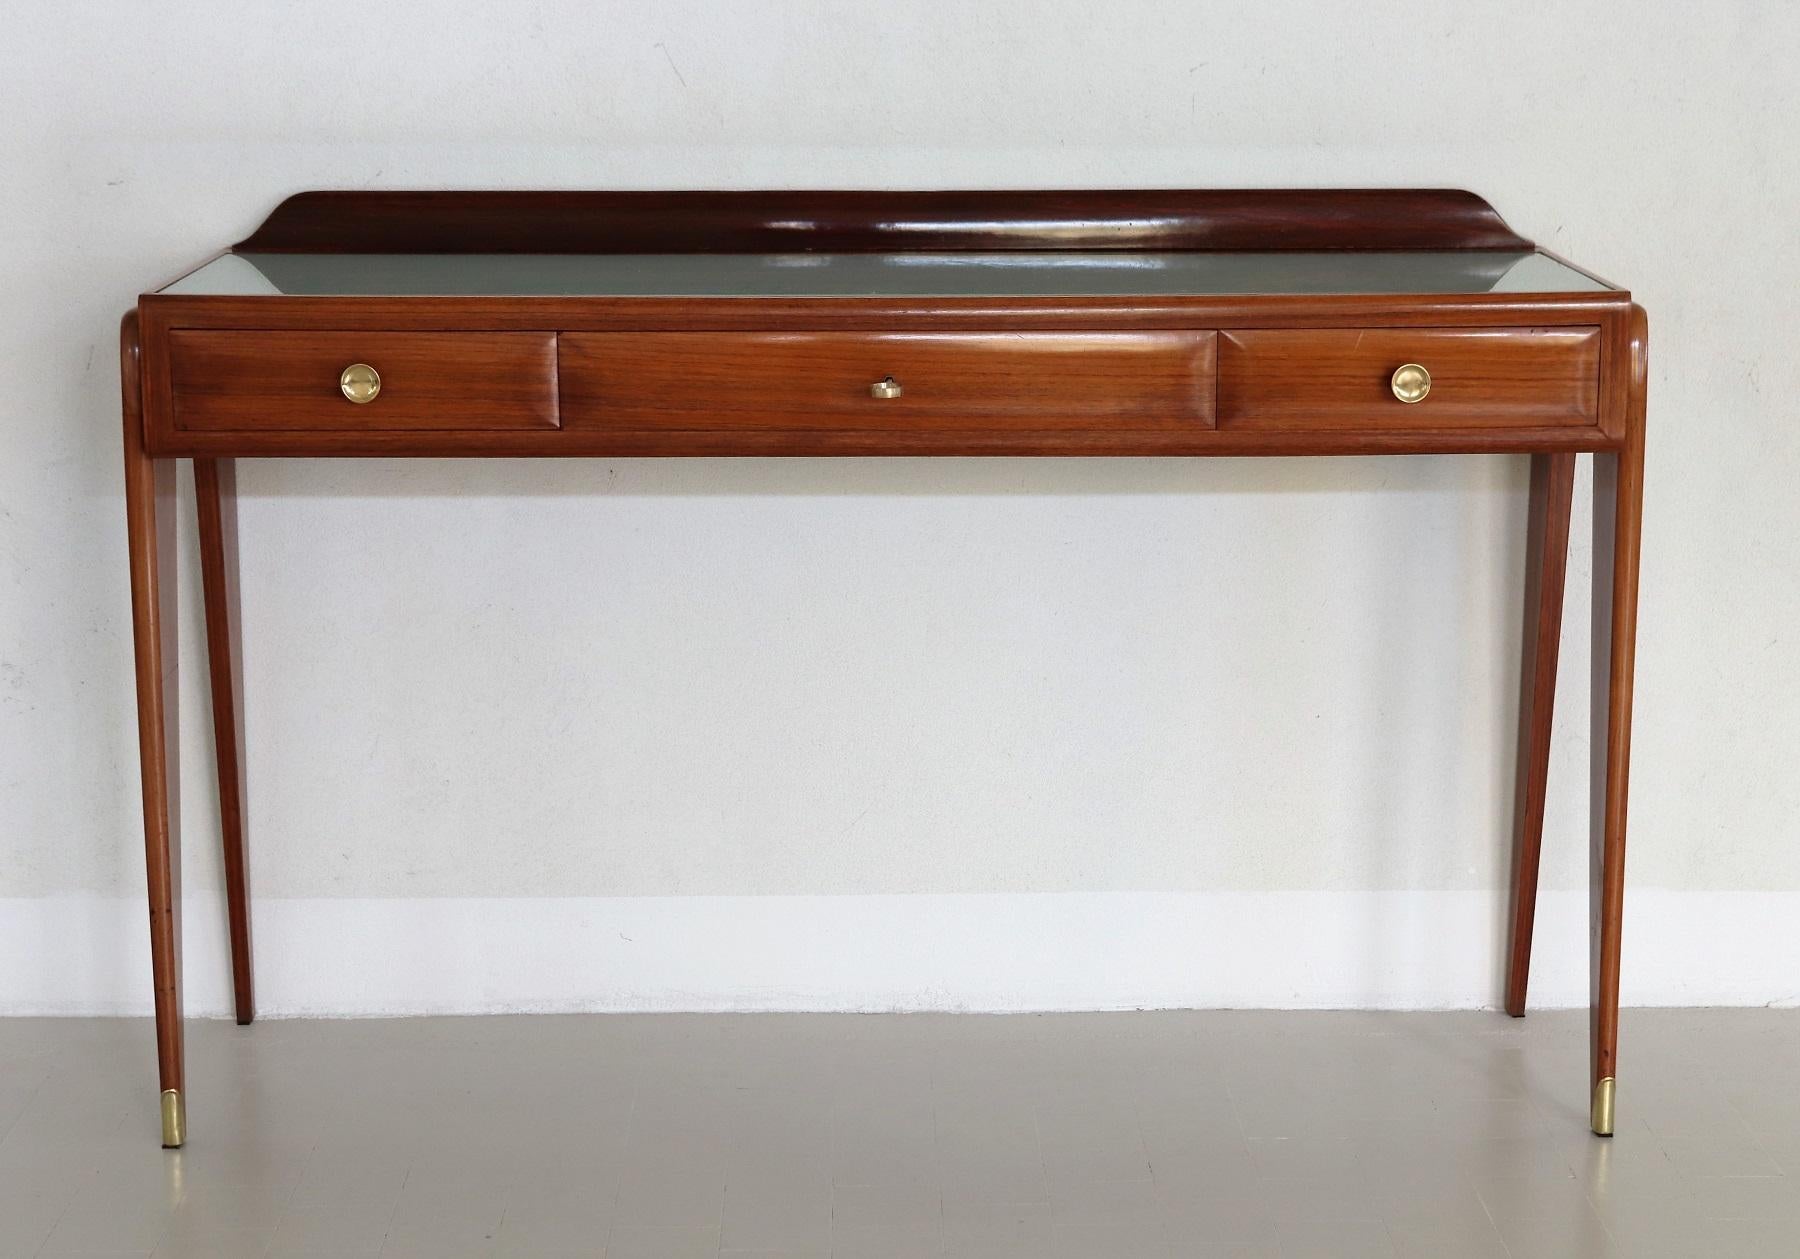 Beautiful console table made by La Permanente Mobili di Cantù, Italy, during the 1950s.
The console table is made of Mahogany wood, inside the drawers made of beech wood. The wood is in overall very good to excellent condition.
Three drawers.